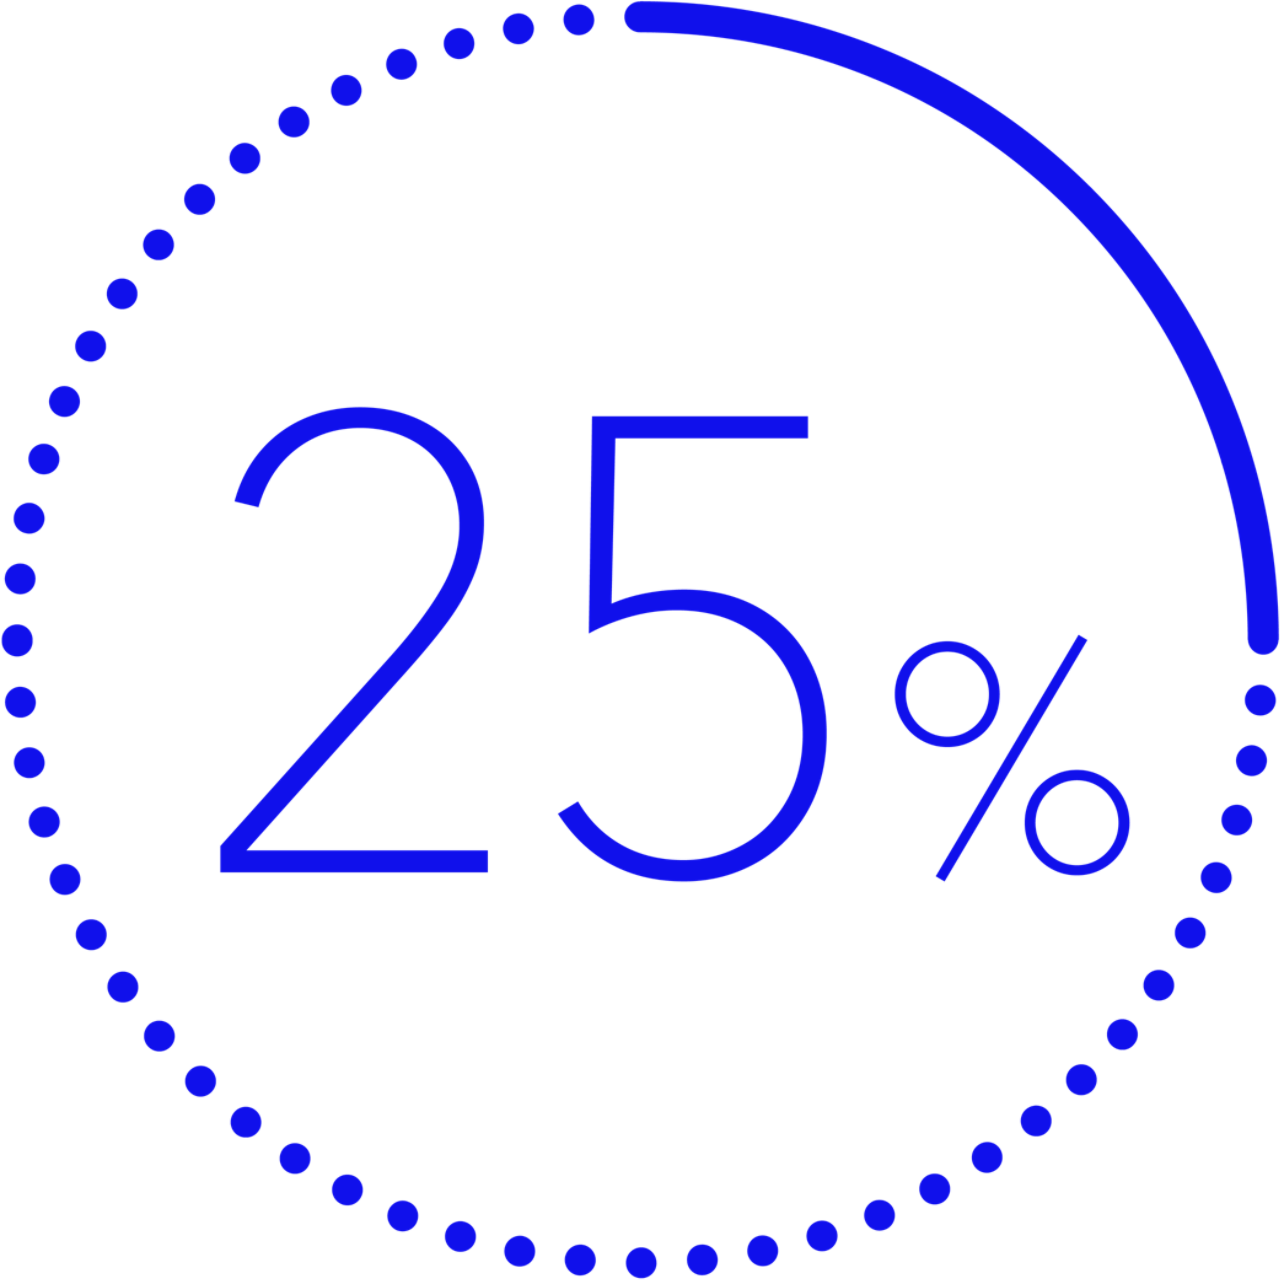 A graphic image of twenty-five percent in numeric form